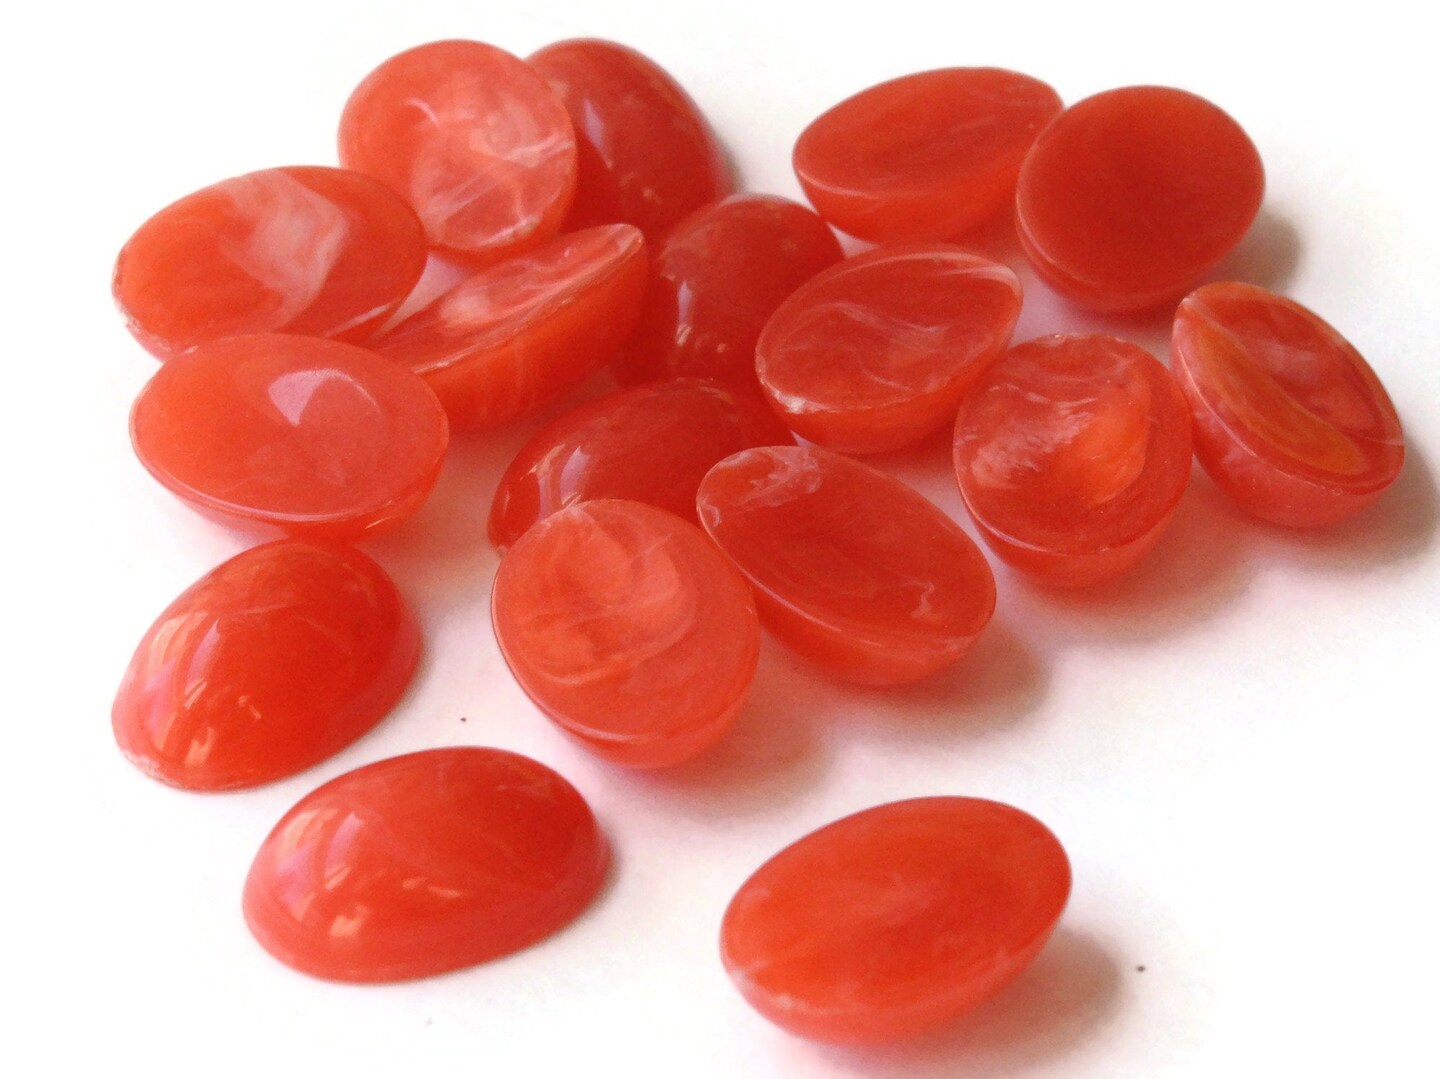 17 14mm x 10mm Red Swirling Oval Vintage Japanese Lucite Cabochons Plastic Flat Back Cabochons